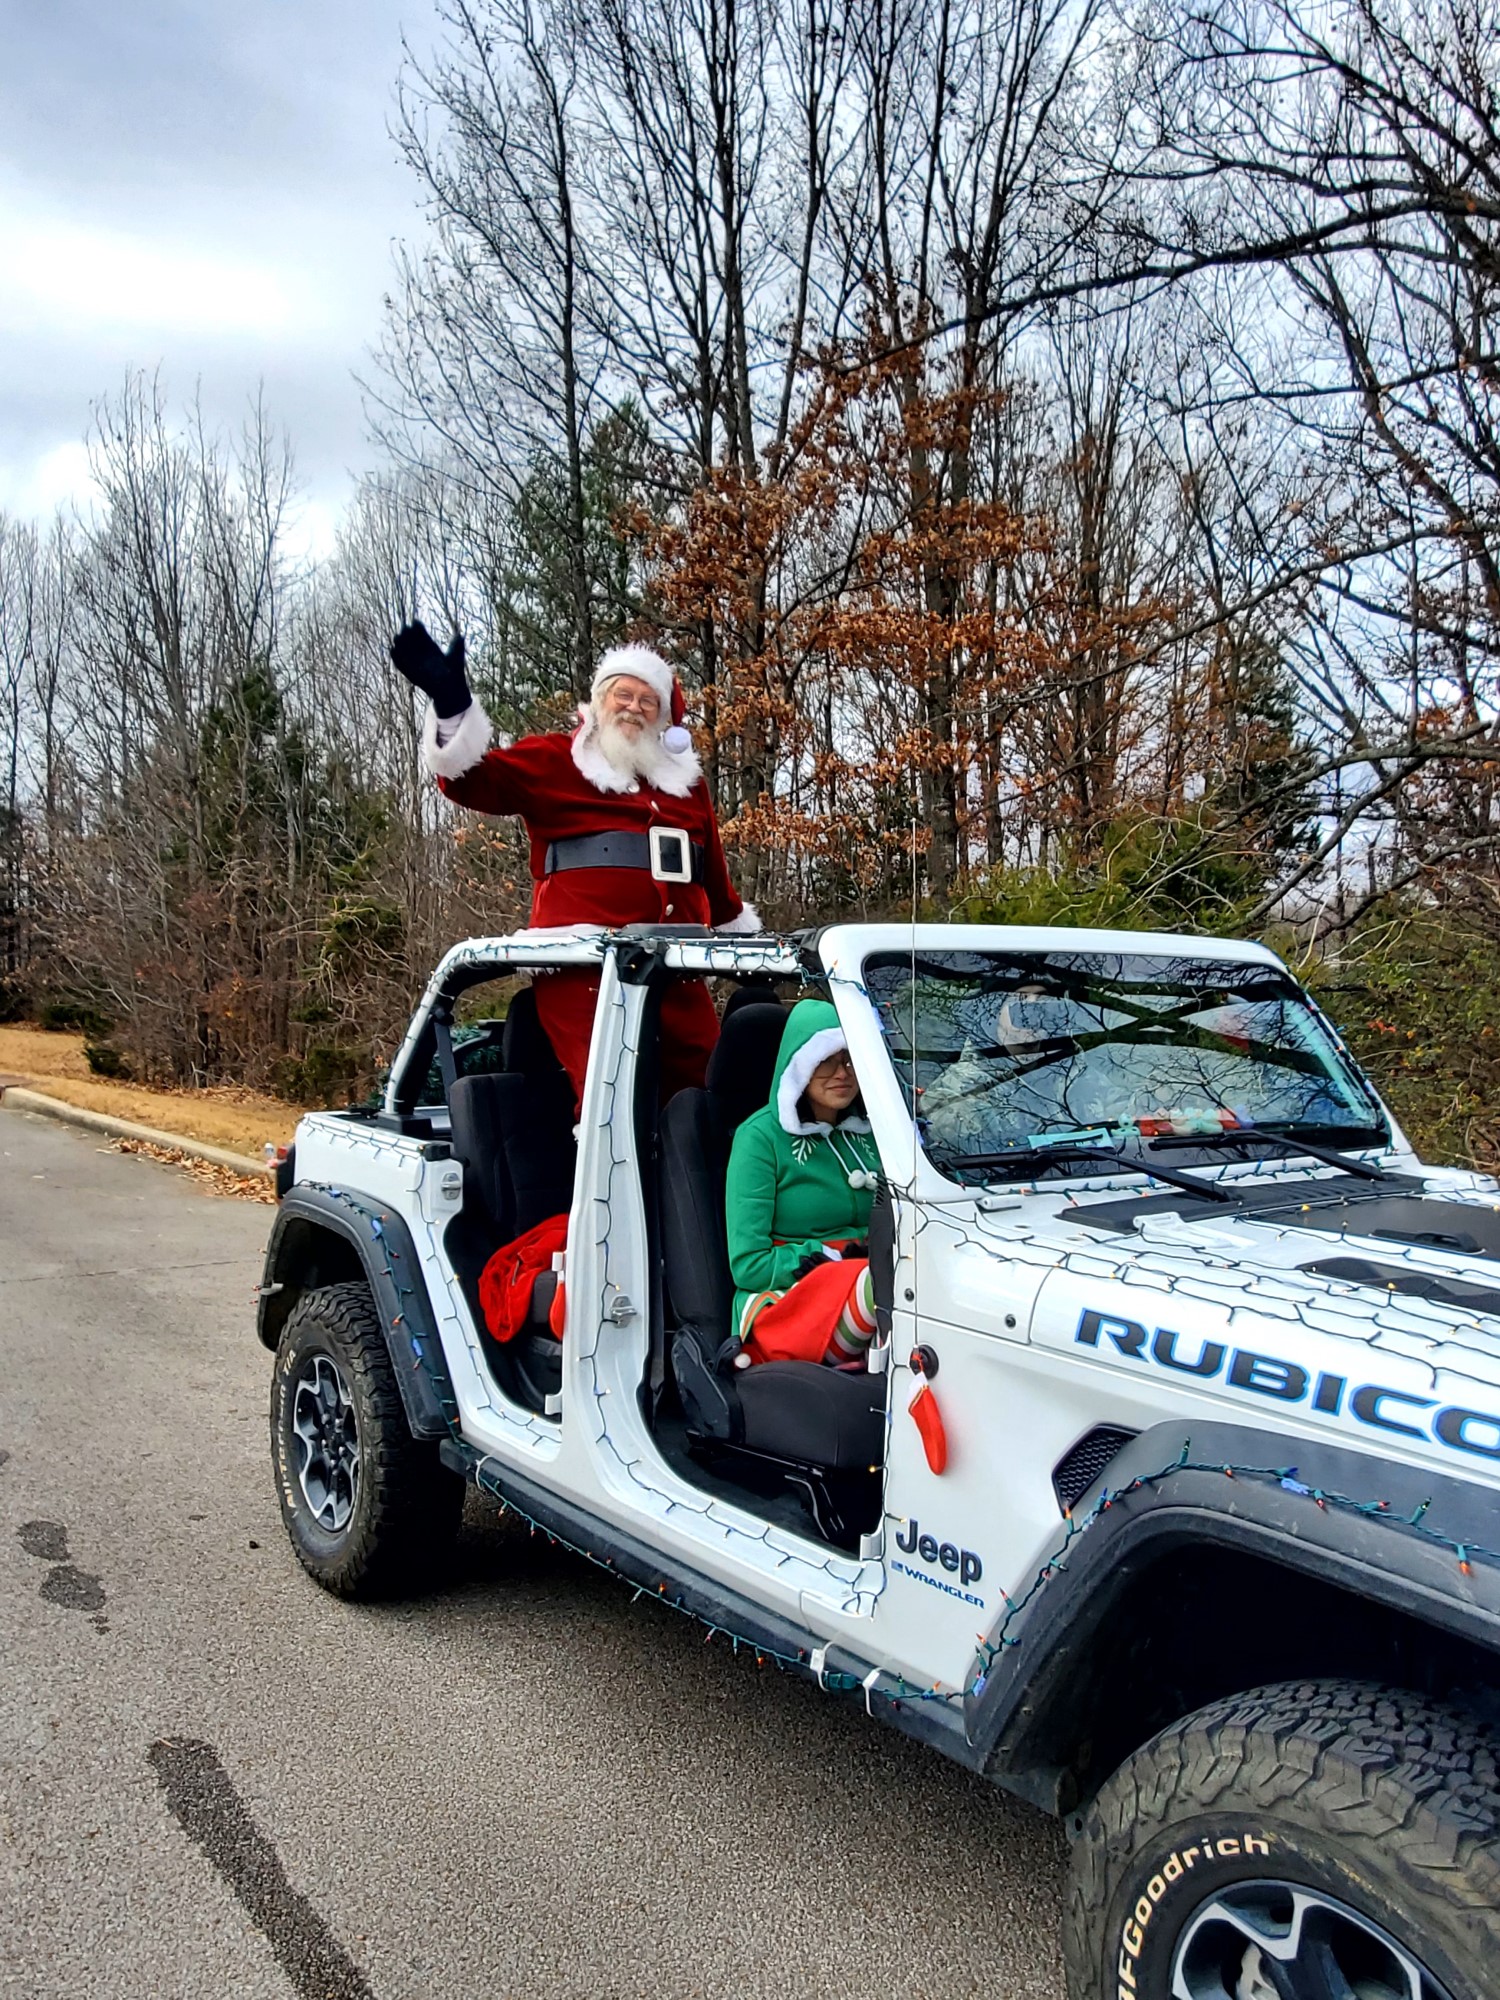 Santa Clause waving from the back seat of a white, open top jeep